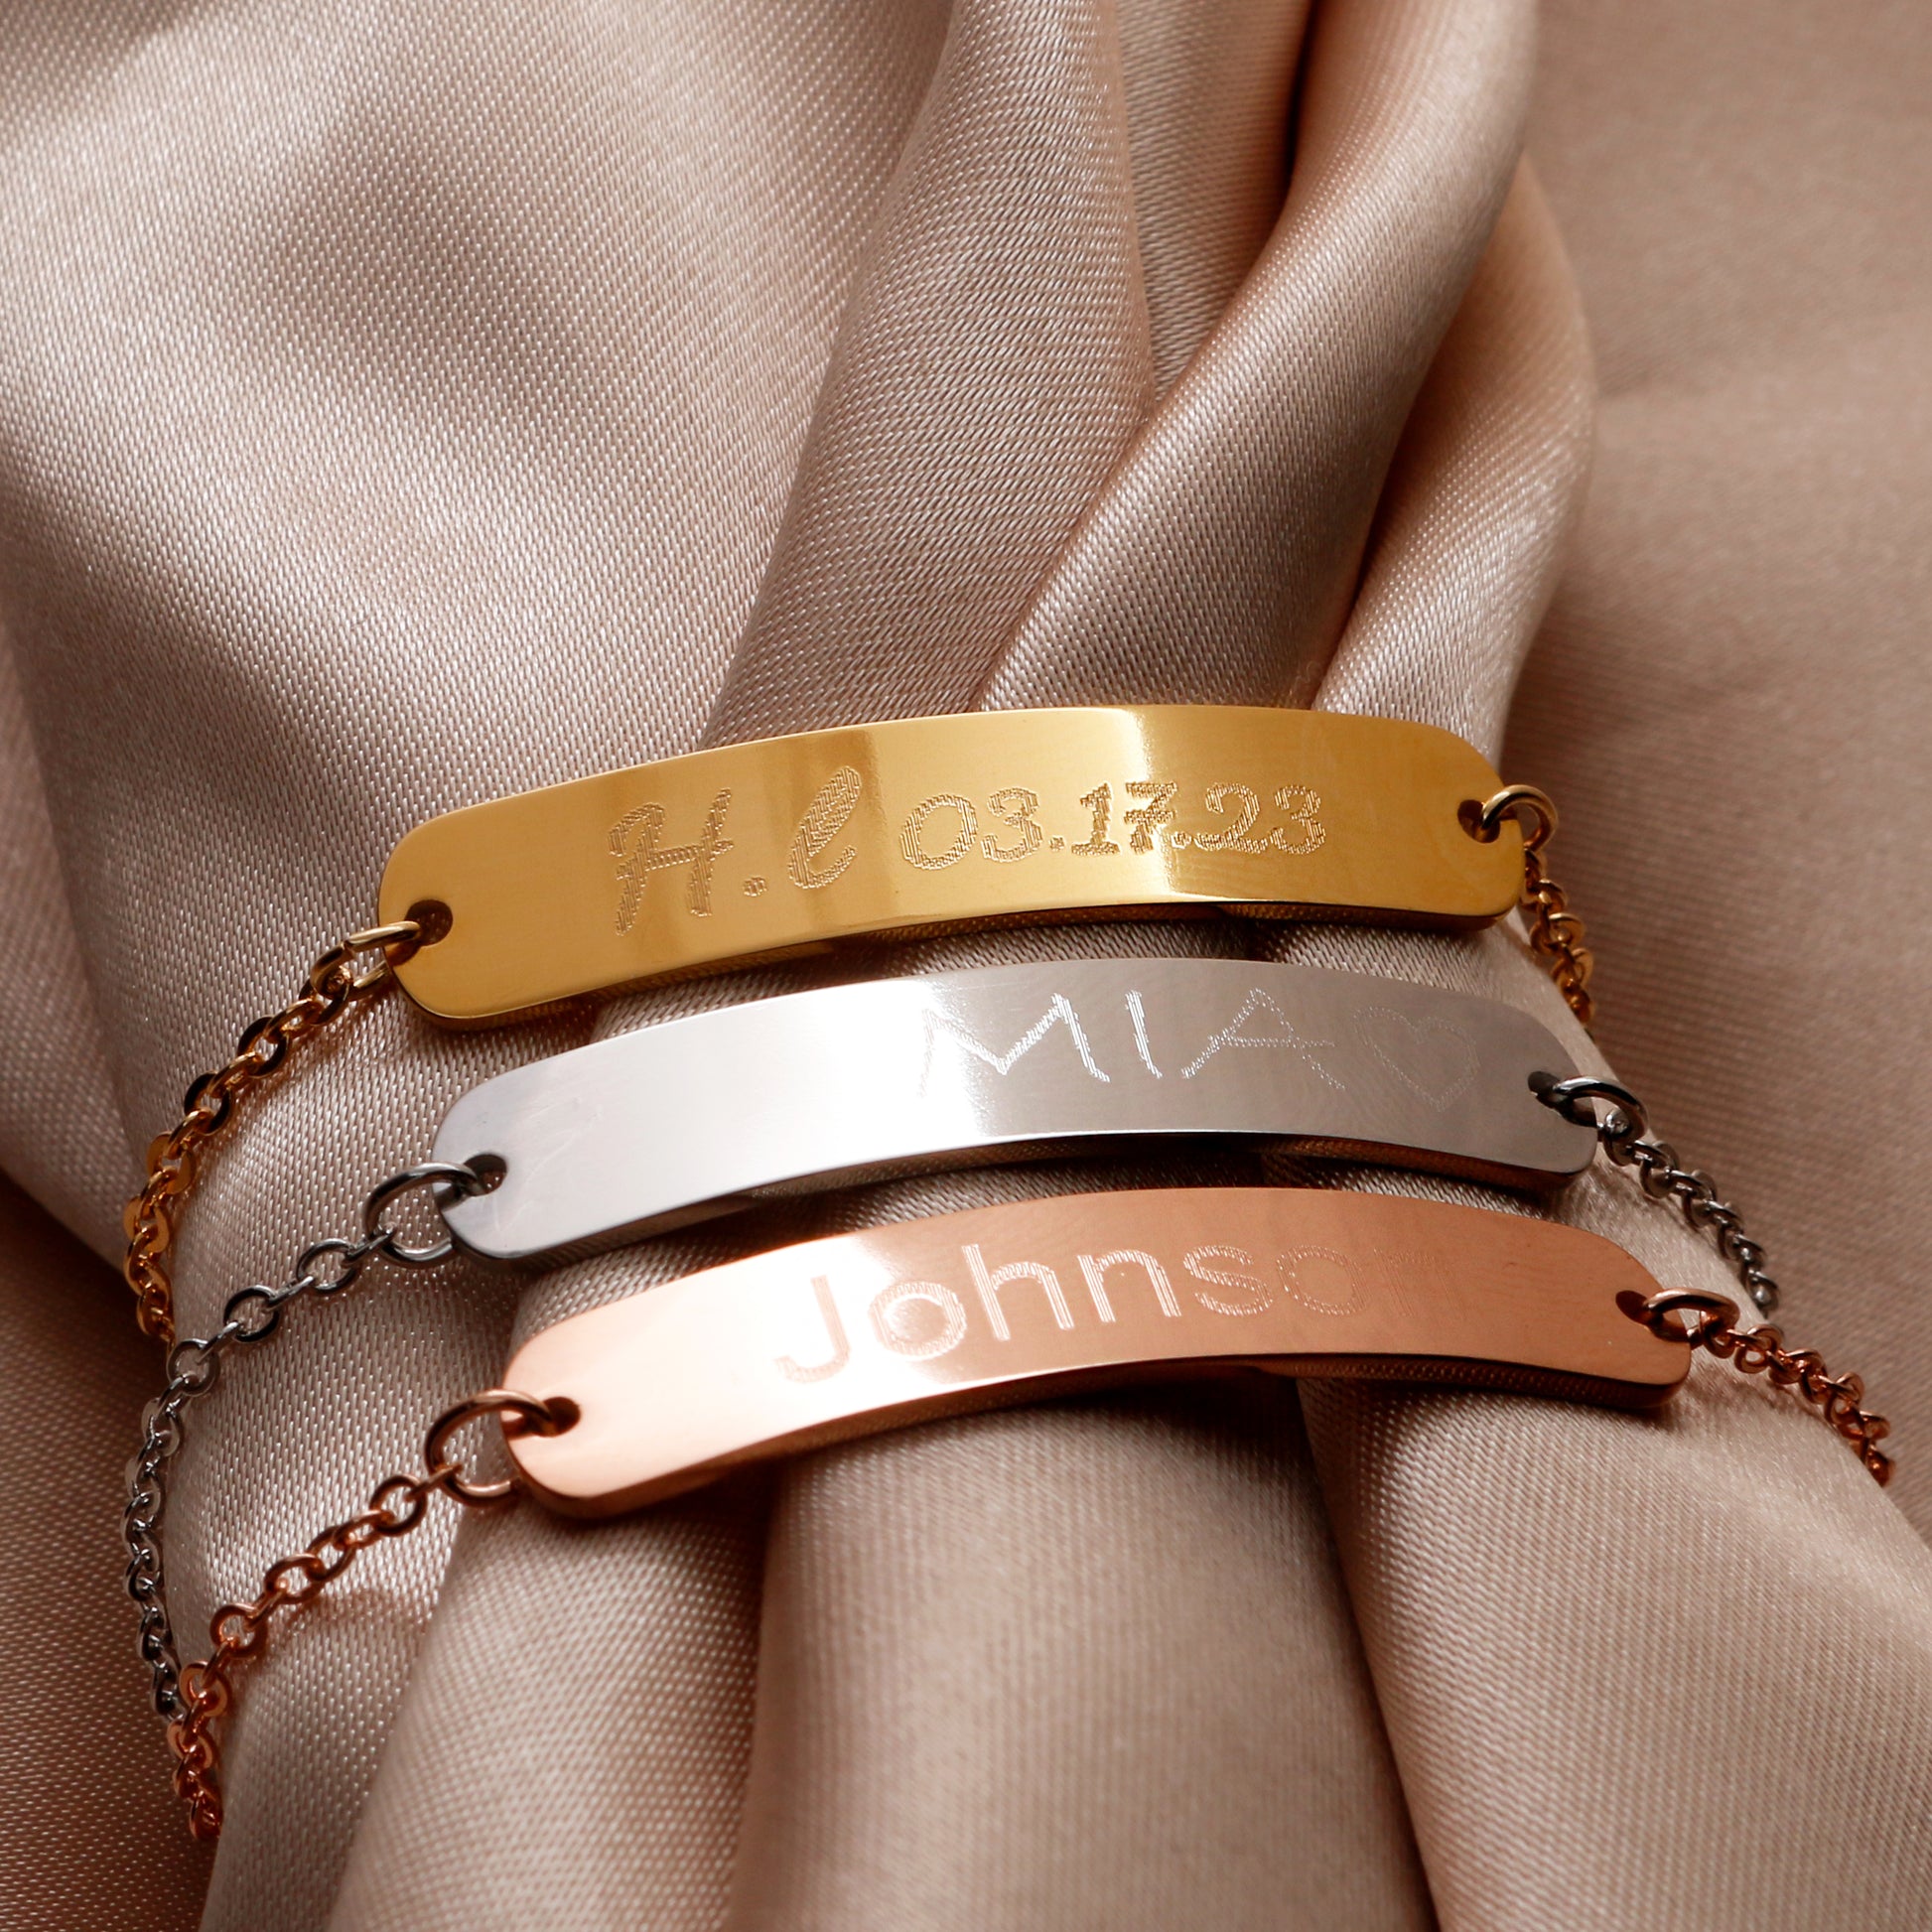 Buy Custom Name Bar Bracelet - Personalized Elegance in 16K Gold, Silver, and Rose Gold at Petite Boutique